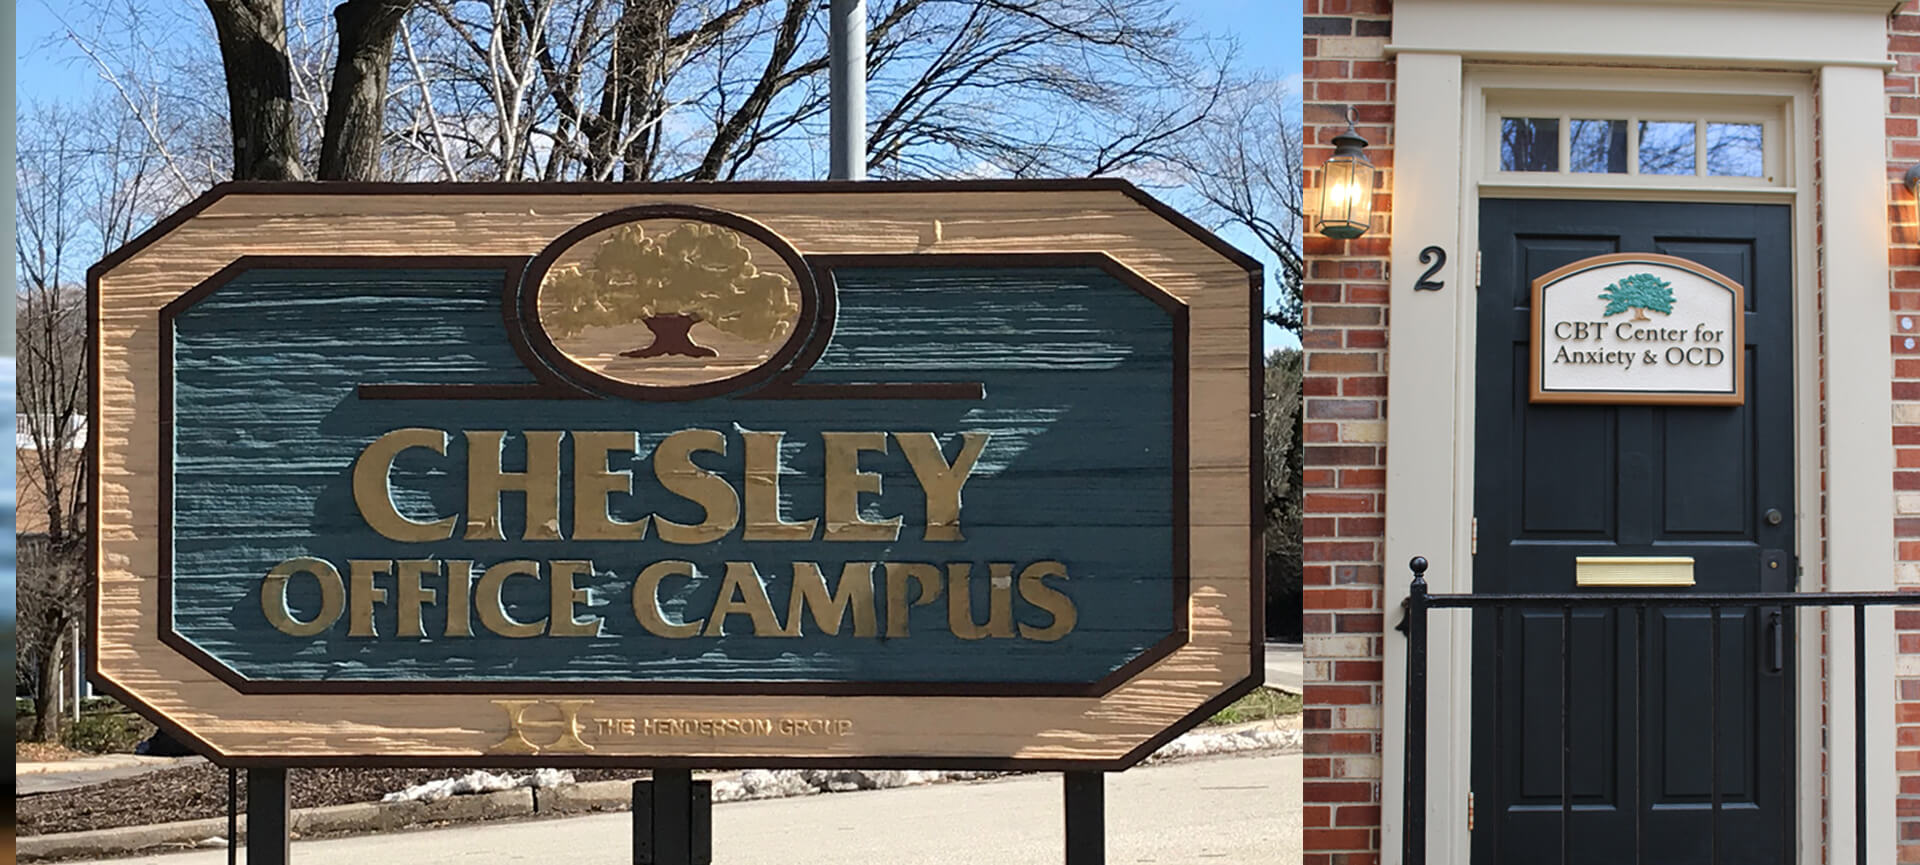 Chesley Office campus board